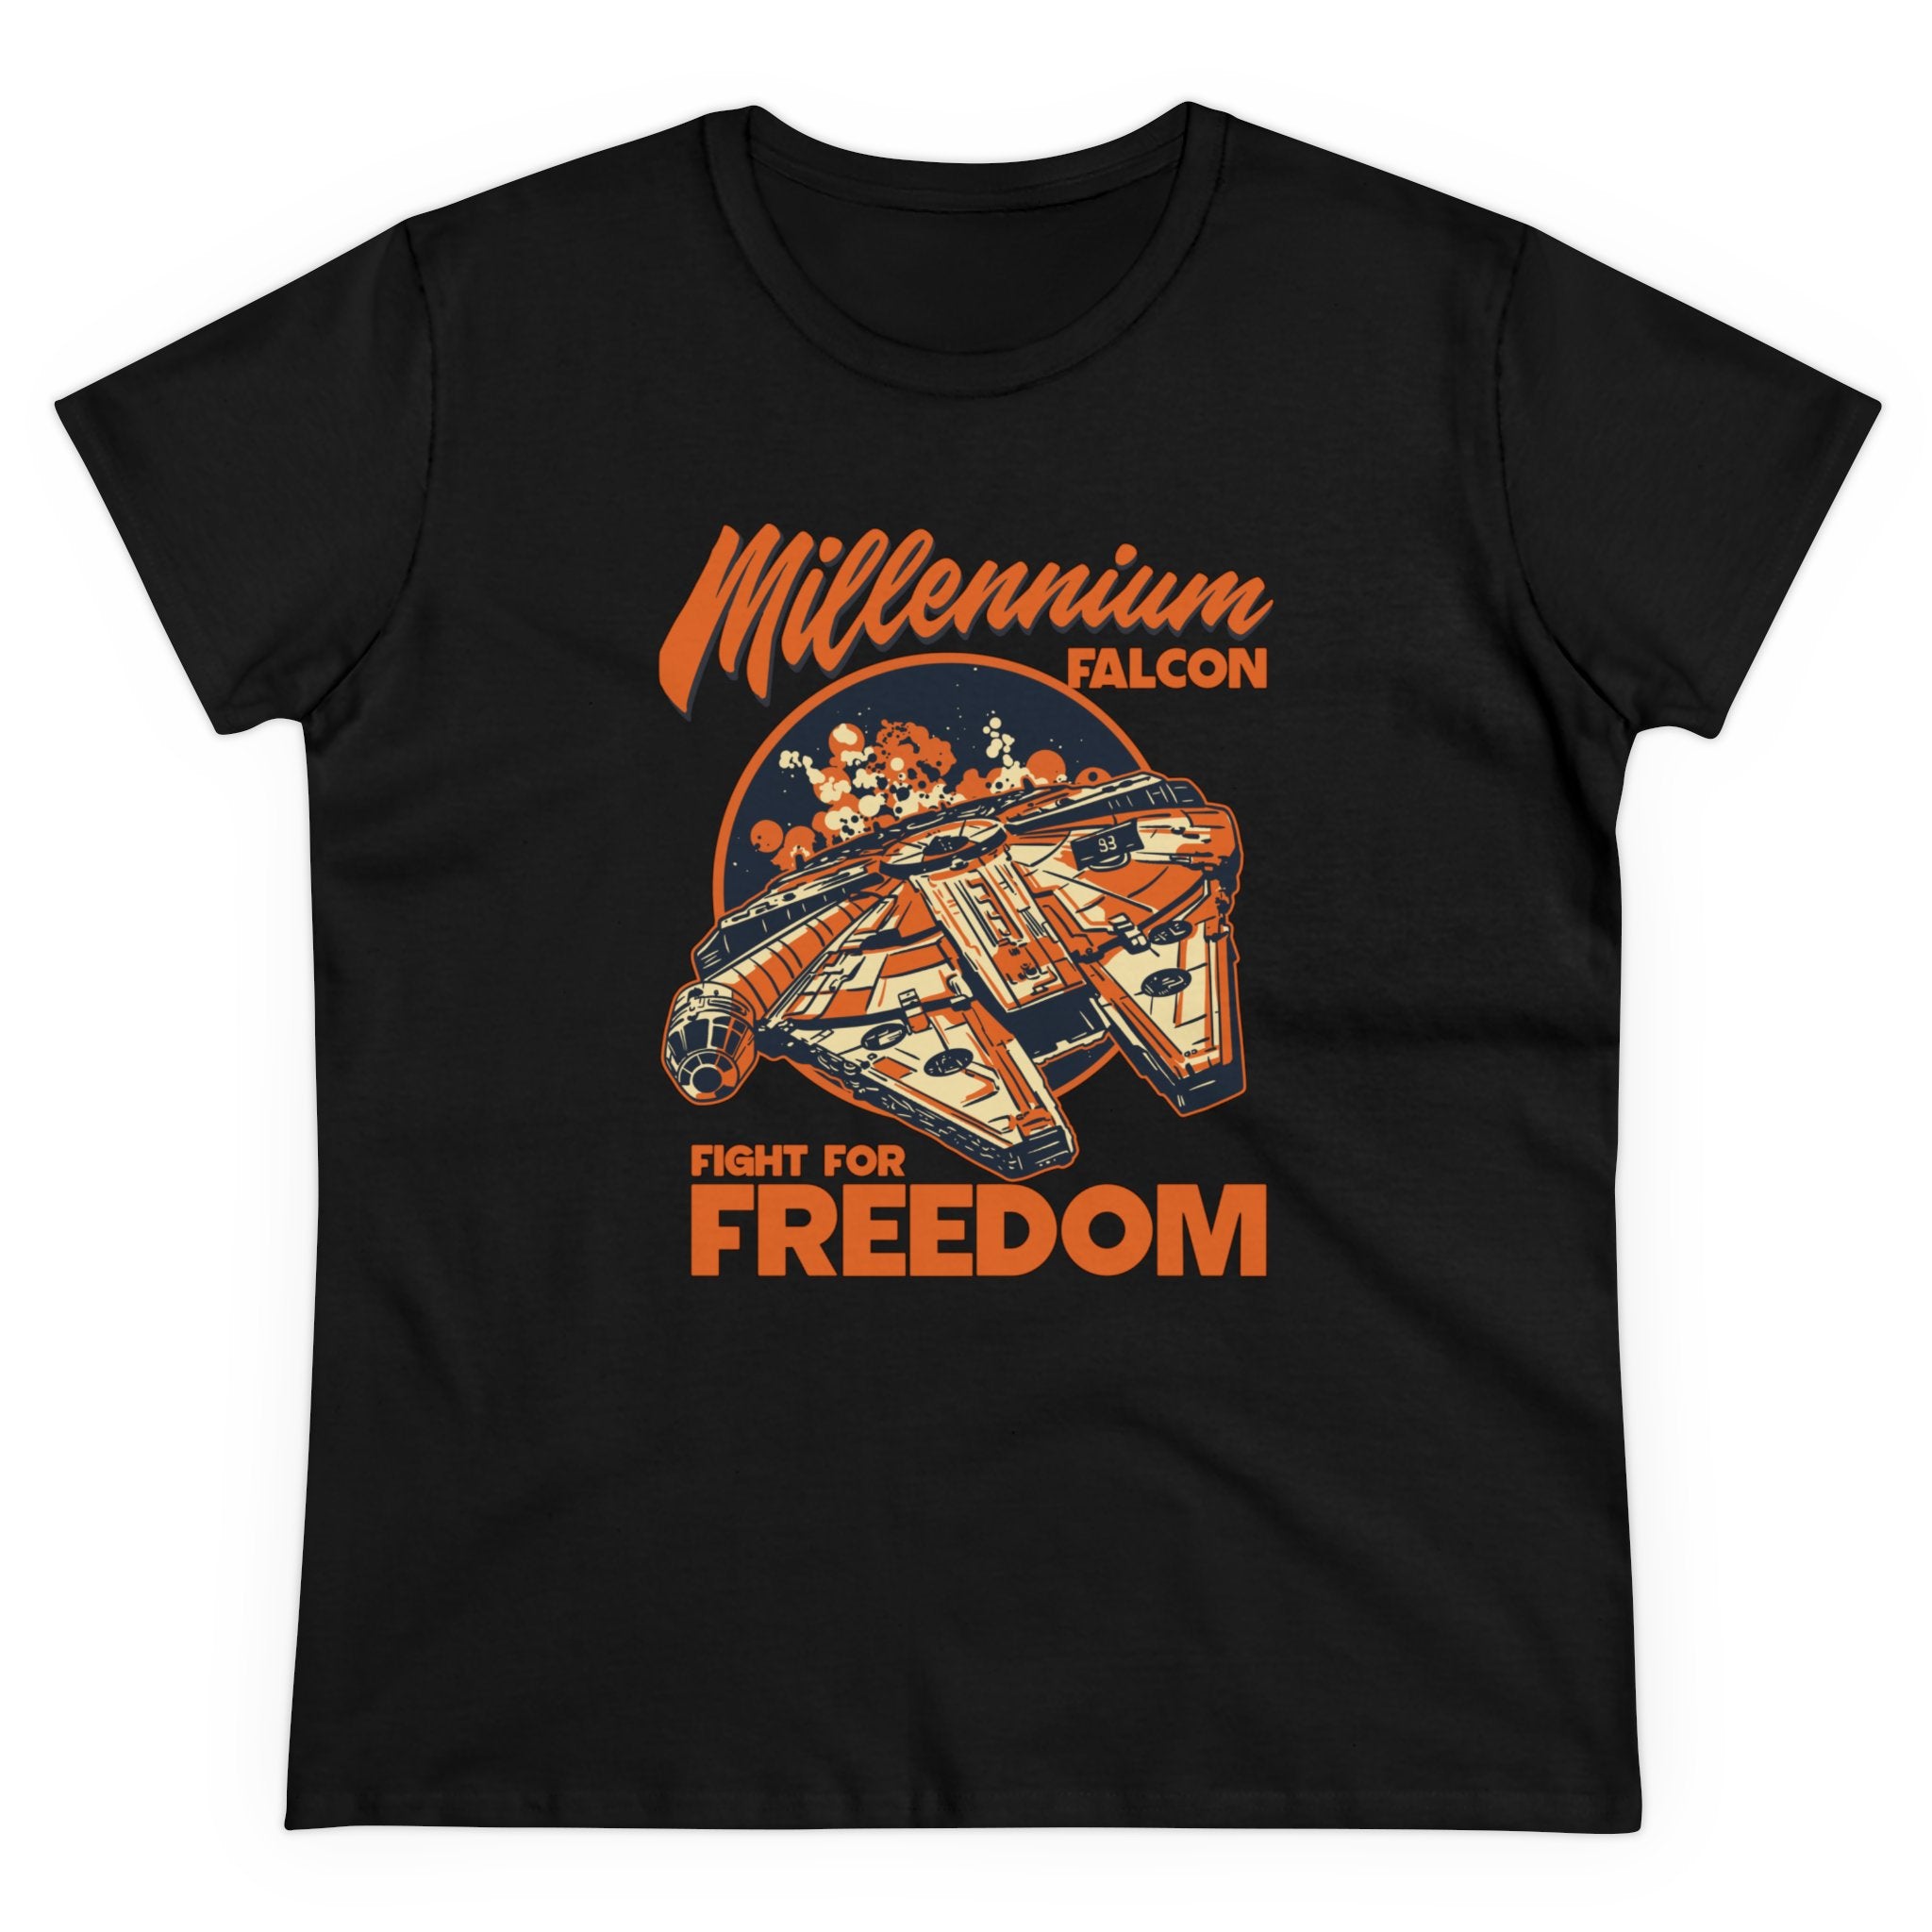 Black T-shirt crafted from soft pre-shrunk cotton, featuring an illustrated spaceship with "Millennium Falcon" above and "Fight for Freedom" below in vibrant orange and white letters, blending comfort and style effortlessly. The product name is Falcon - Women's Tee.